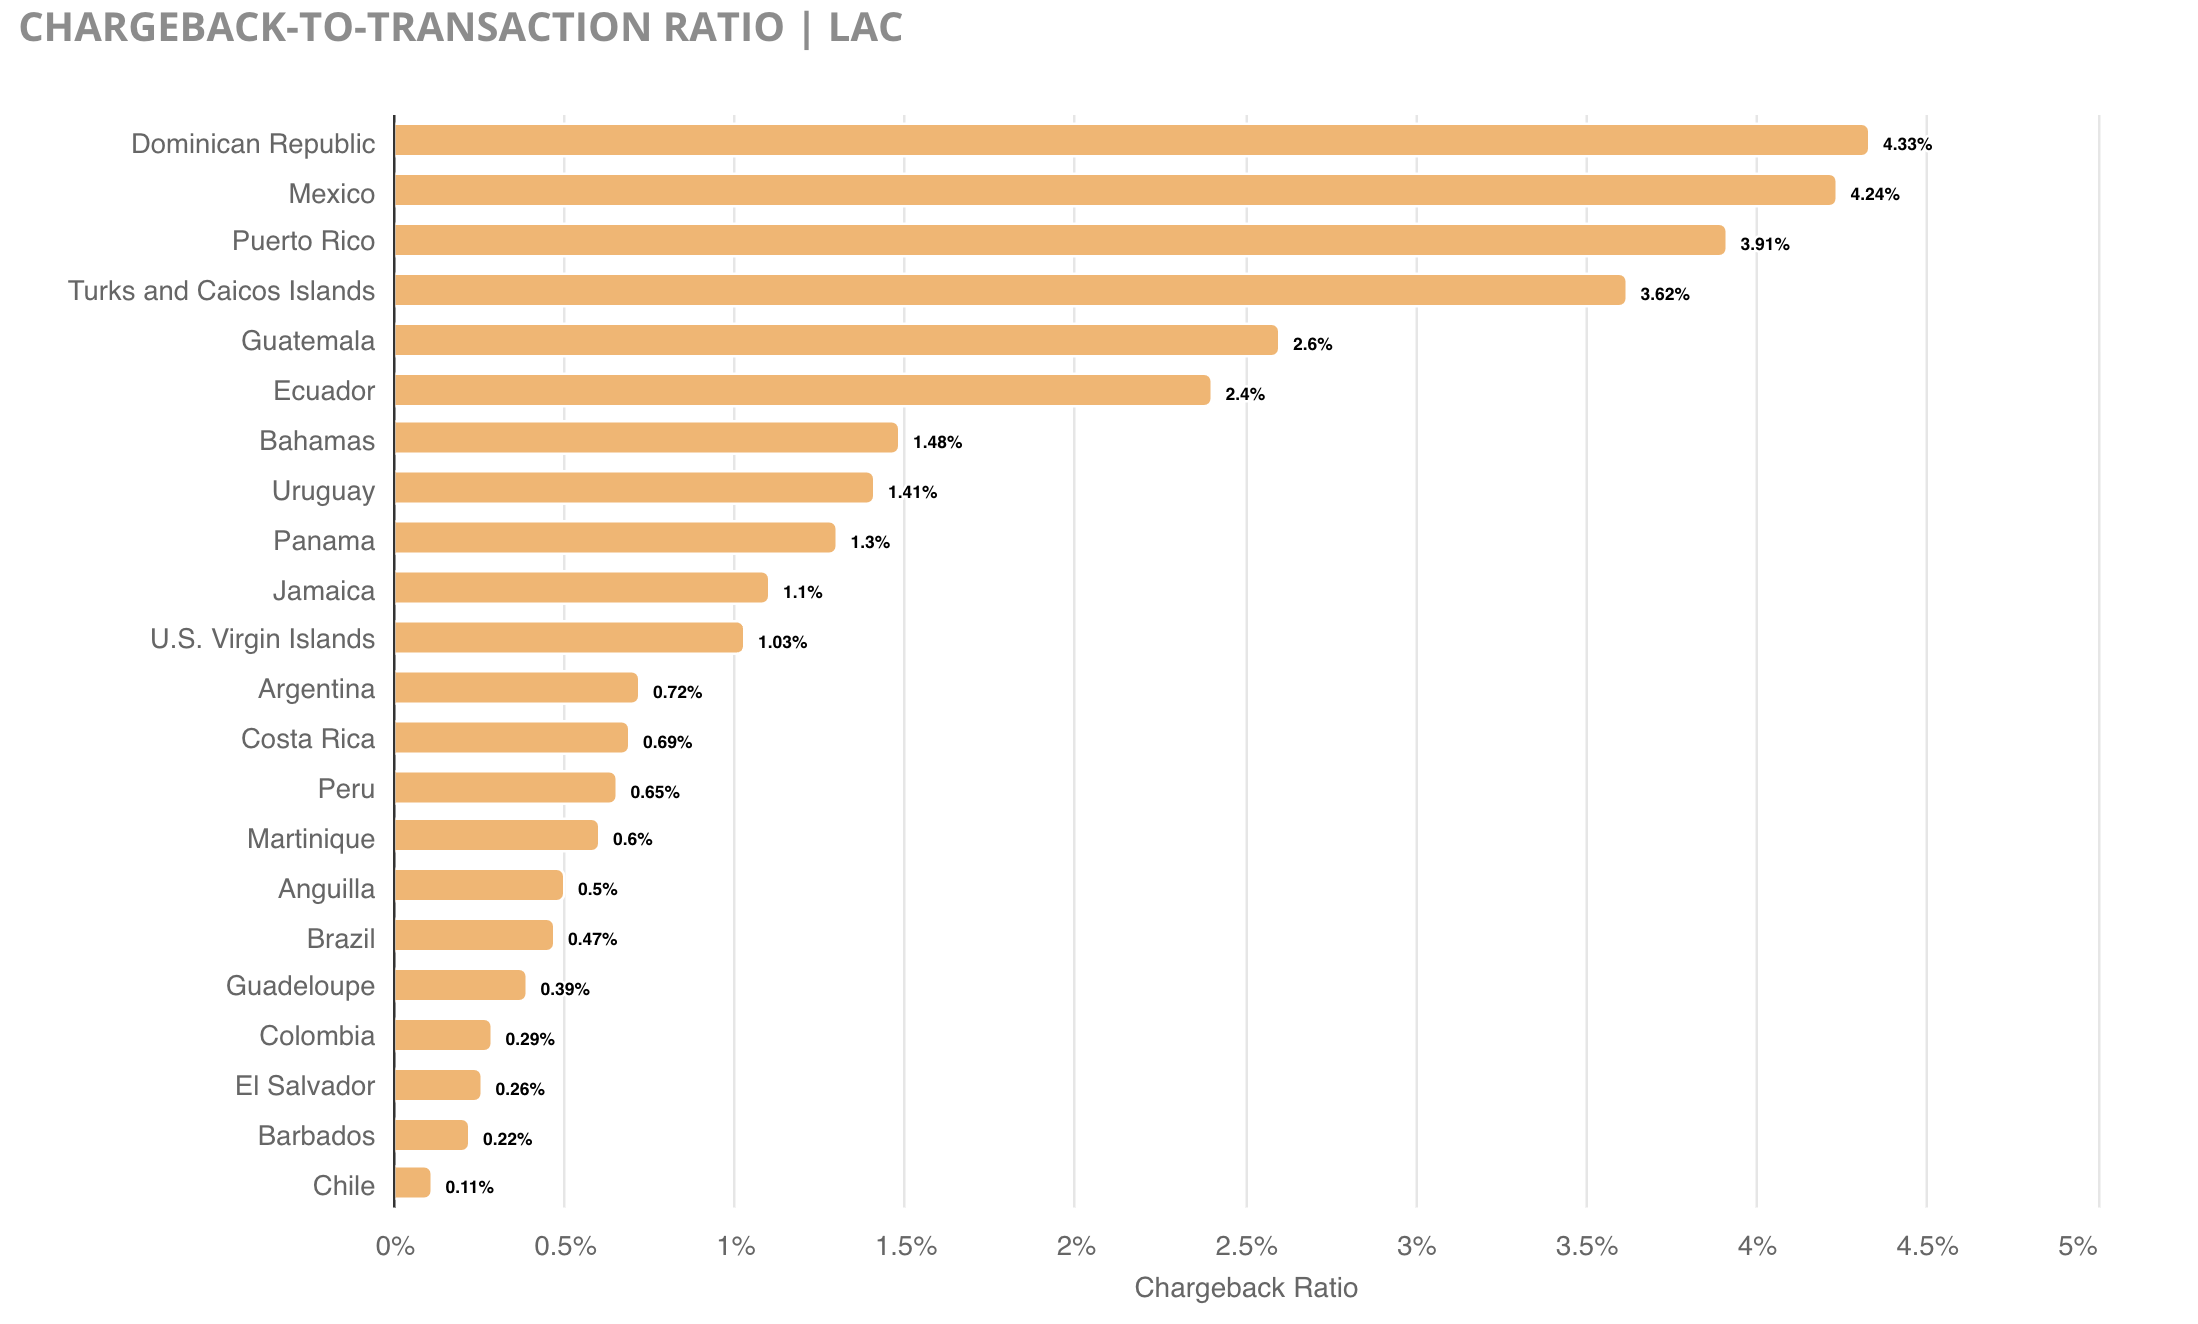 Chargeback-to-transaction ratio in LAC